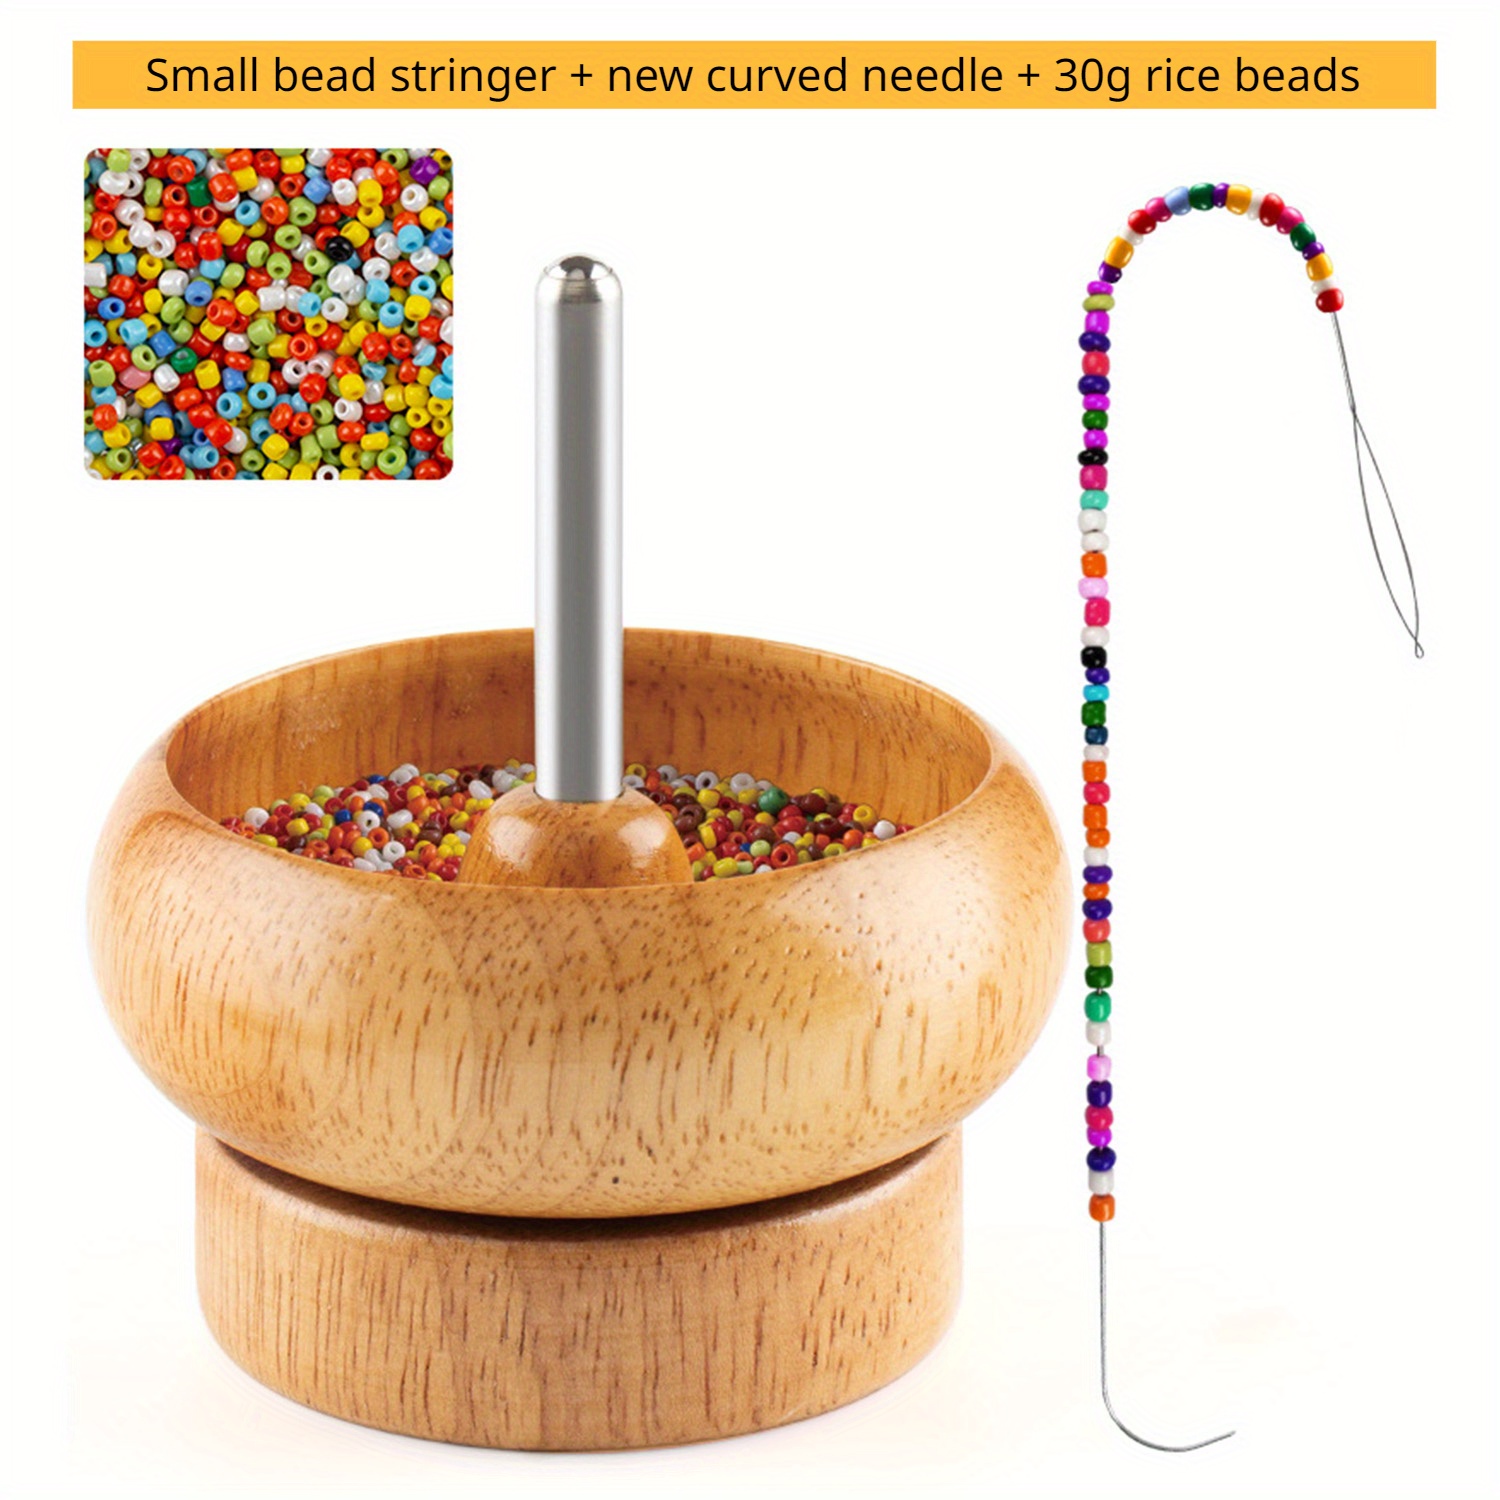 

Wood Bead Spinner Kit With Curved Needle & 90g Colorful Beads - Manual Beading Tool For Diy Jewelry, Waist Beads, Bracelets, Necklaces - Craft Gift Set For Christmas, Valentine's, Wedding Decor